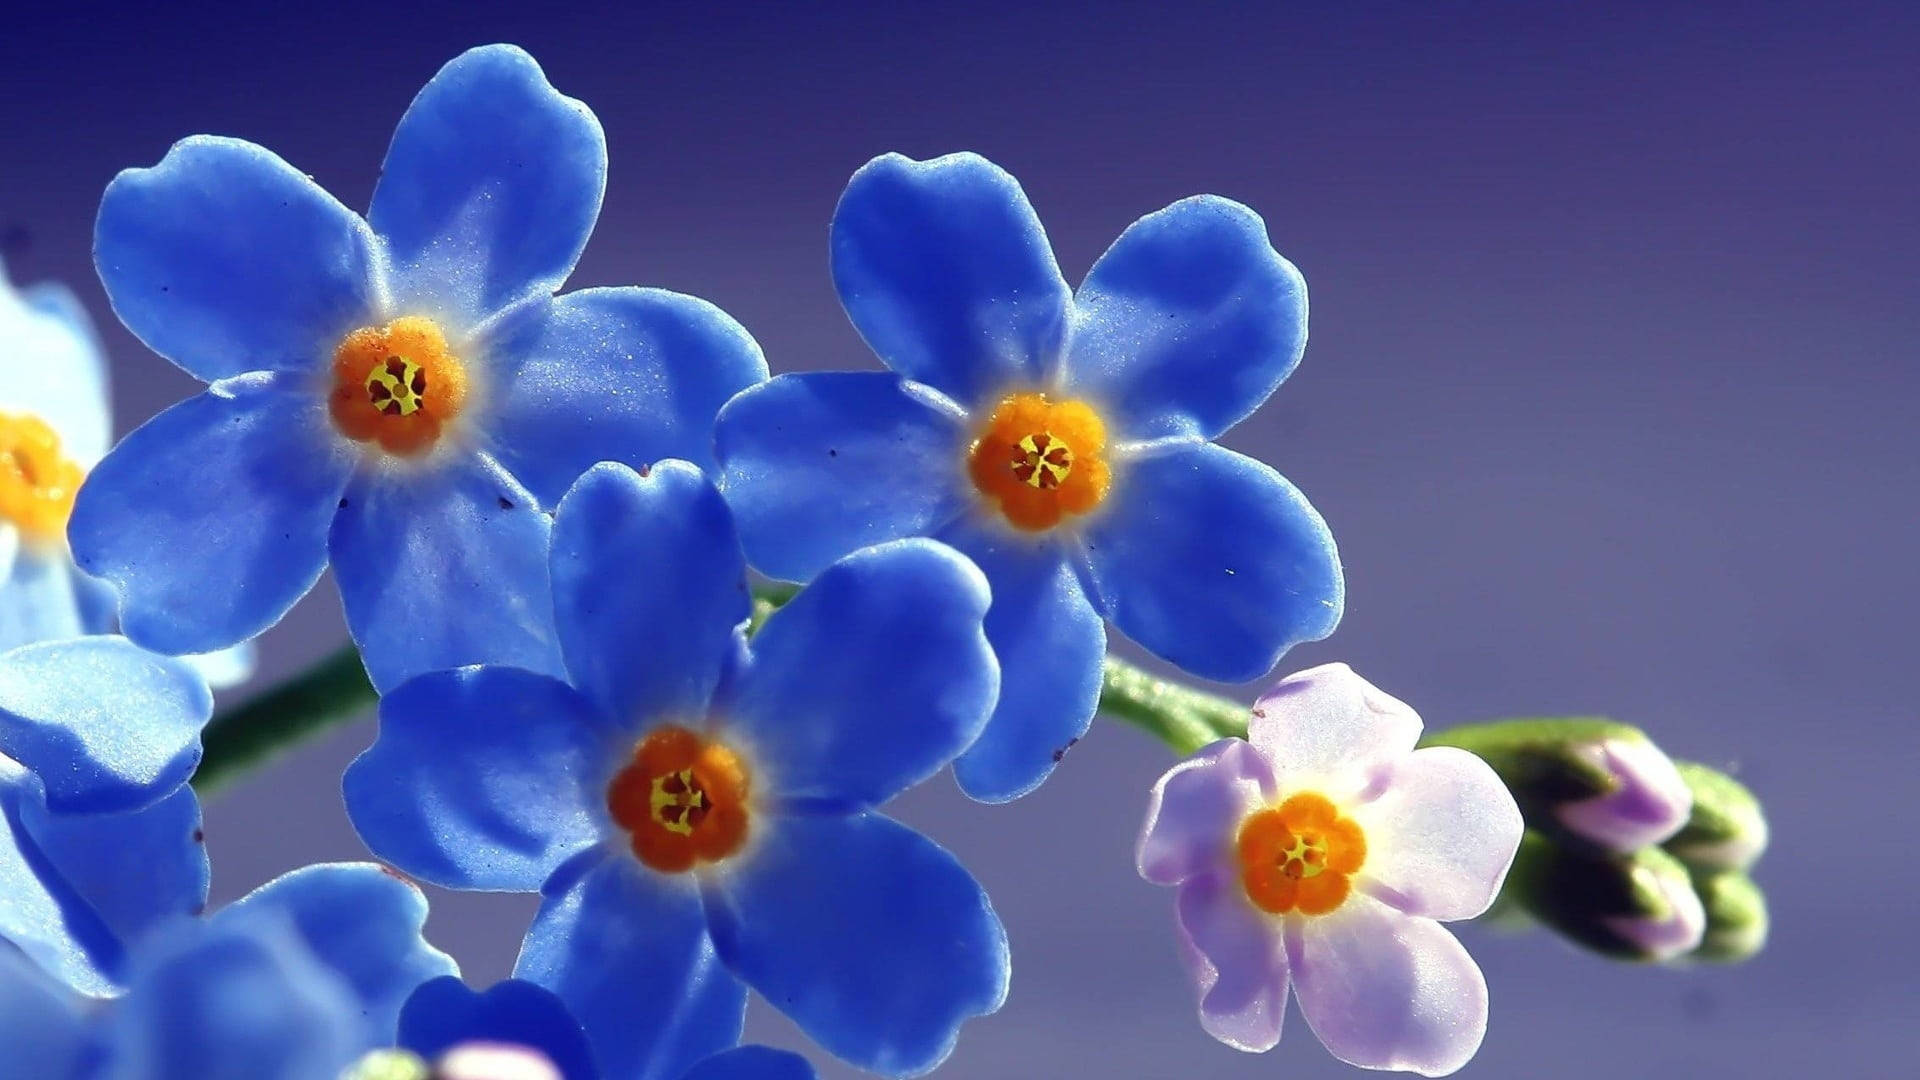 Beautiful Flower Forget Me Not Close-up Picture